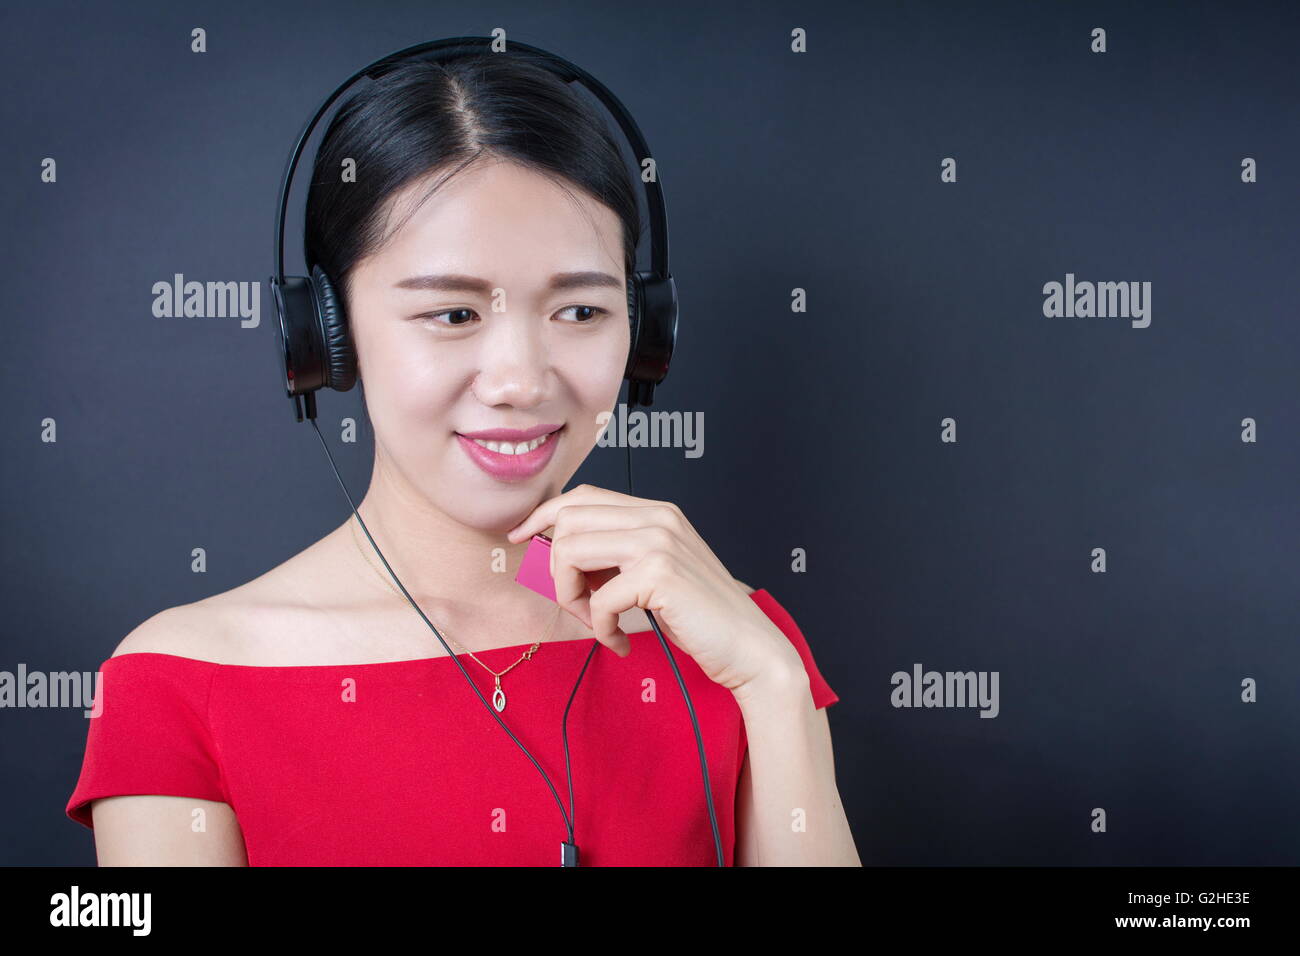 Beautiful asian woman listening to music with headphones Stock Photo